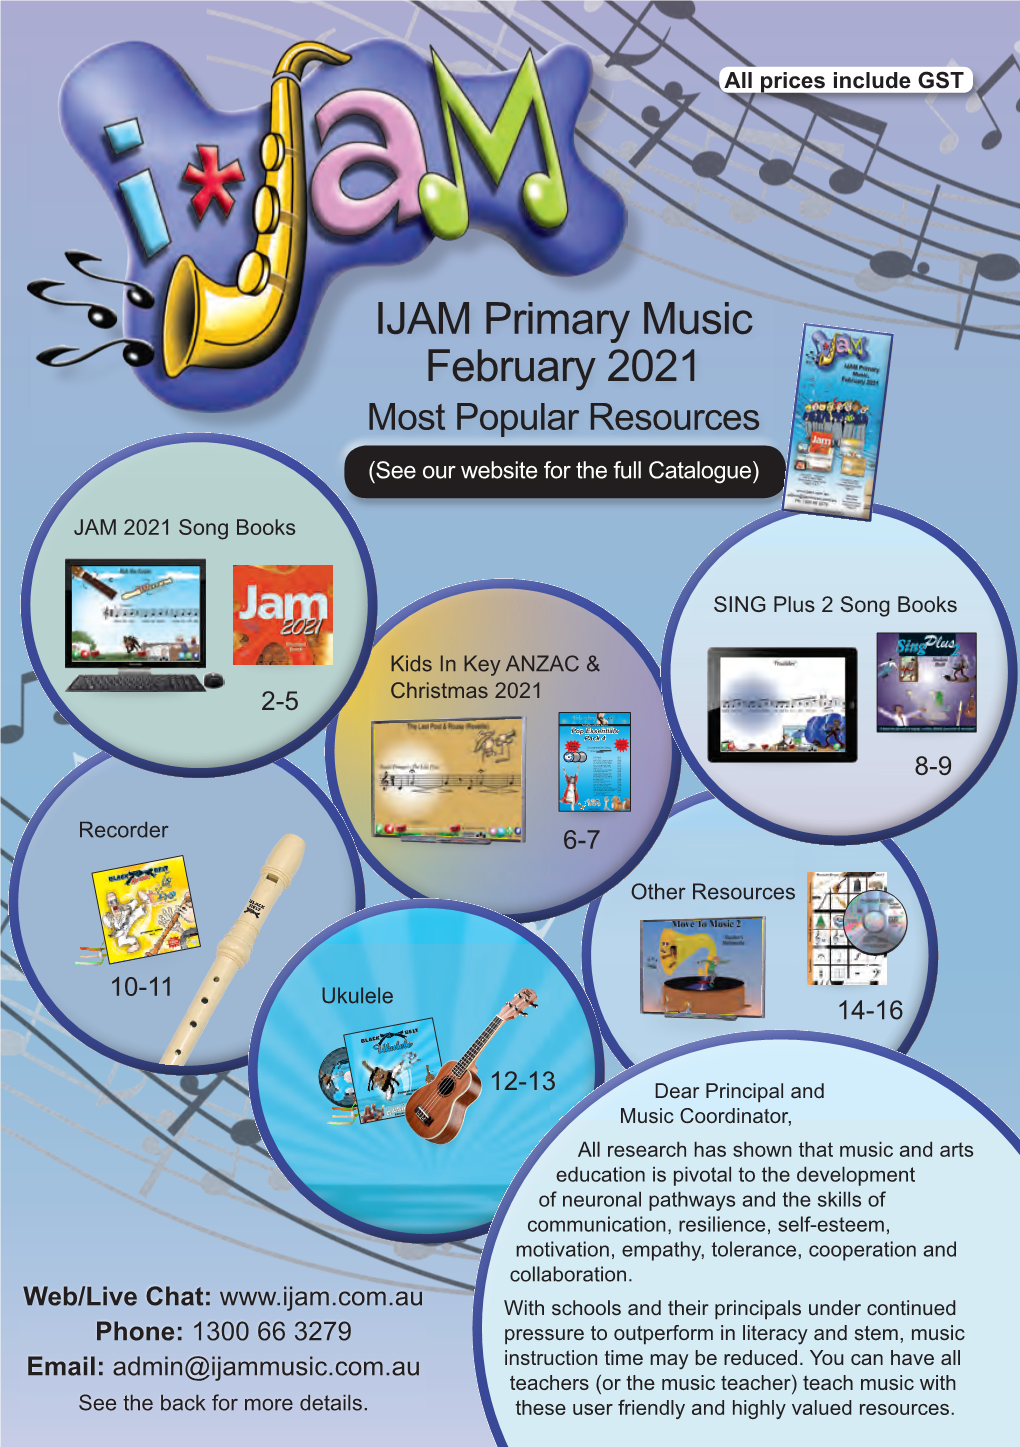 IJAM Primary Music February 2021 Most Popular Resources (See Our Website for the Full Catalogue)